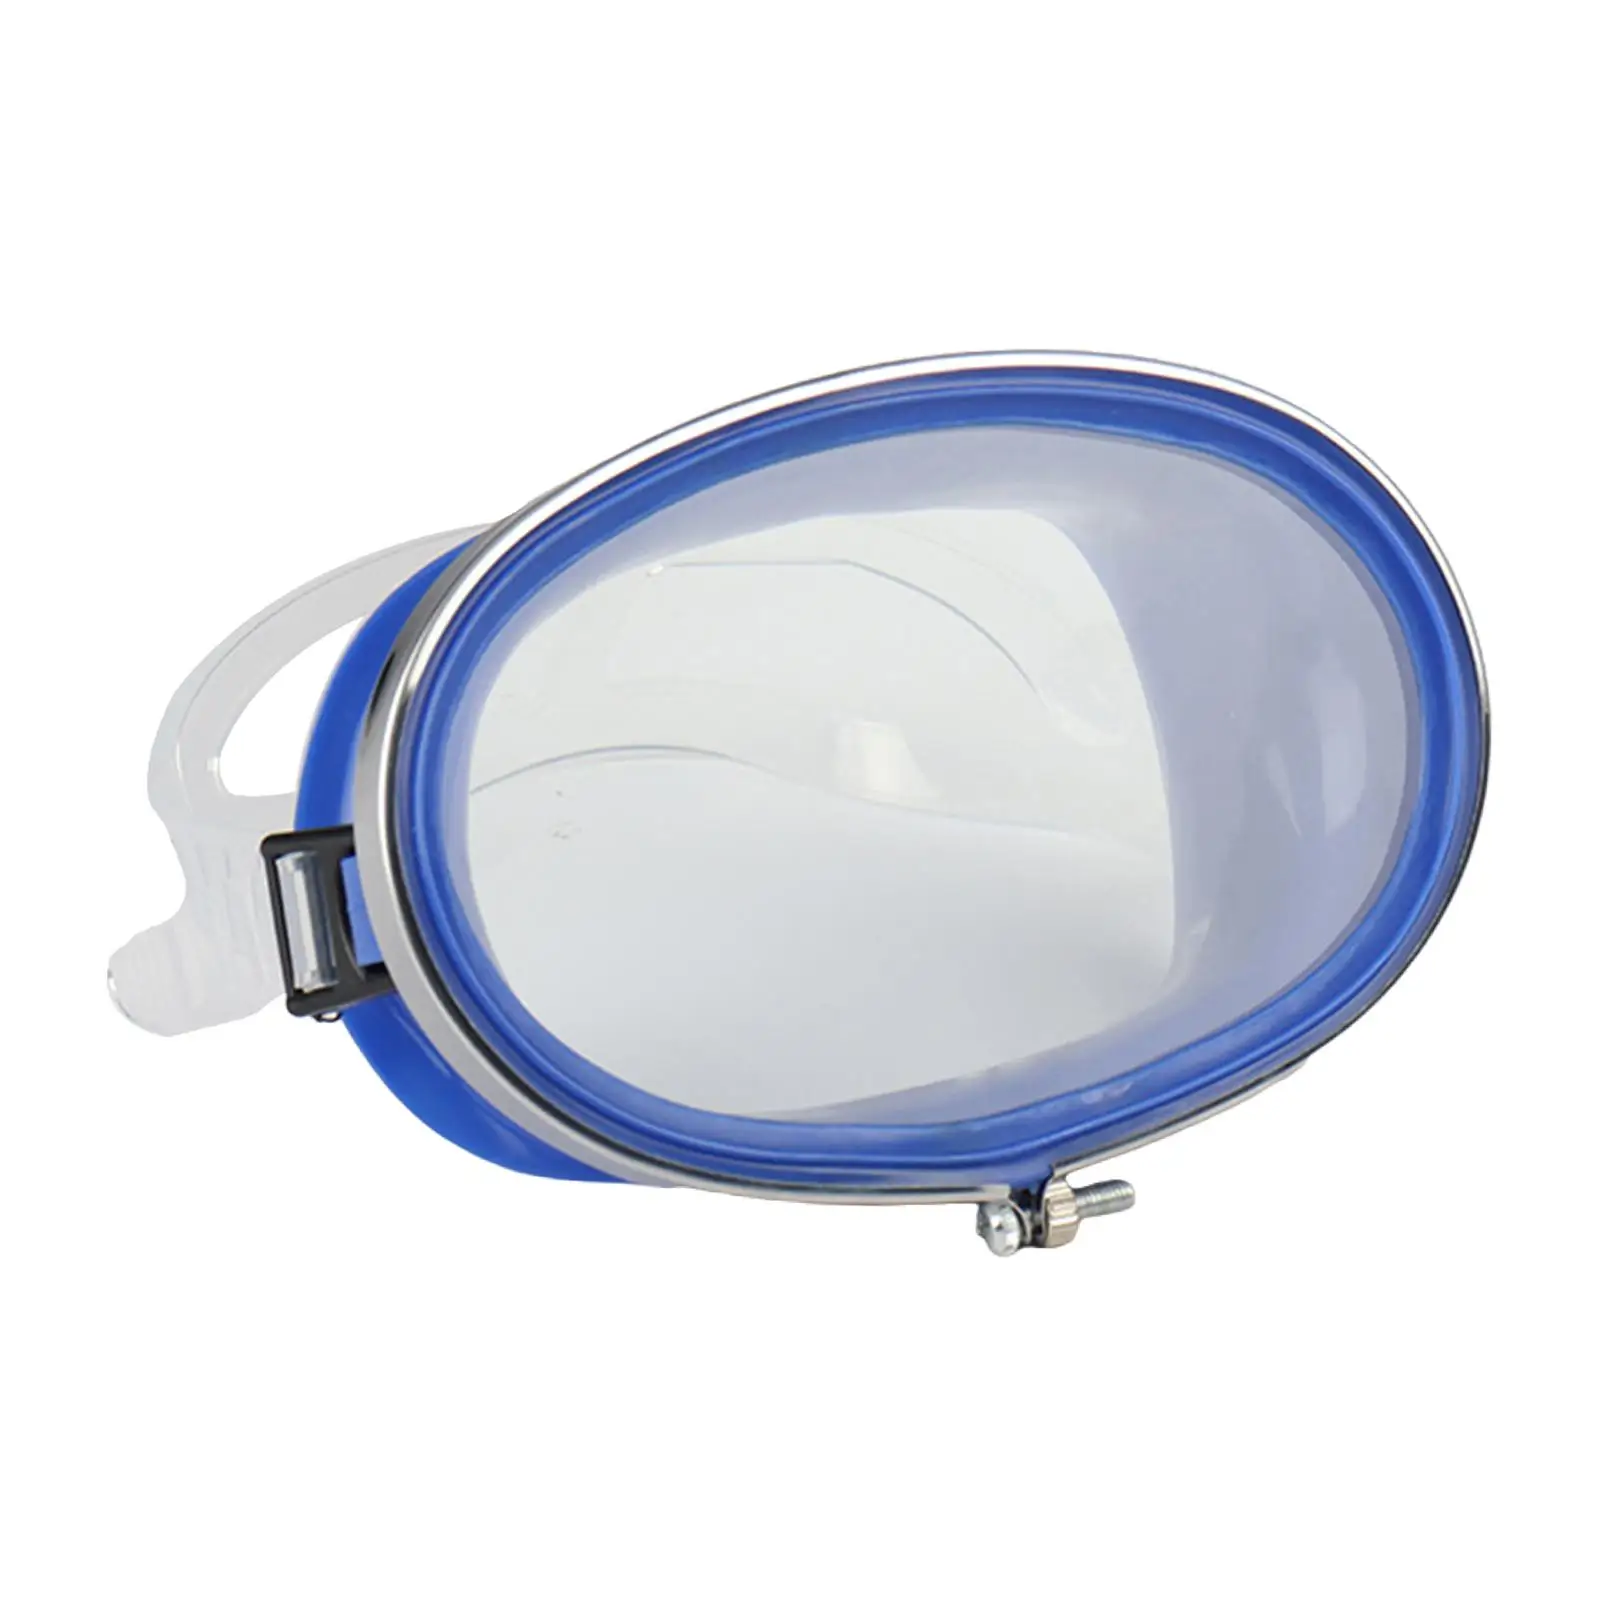 Diving Mask Waterproof Leakproof Tempered Glass Lens Clear Lens Snorkel Mask Swimming Mask Scuba Diving Goggles